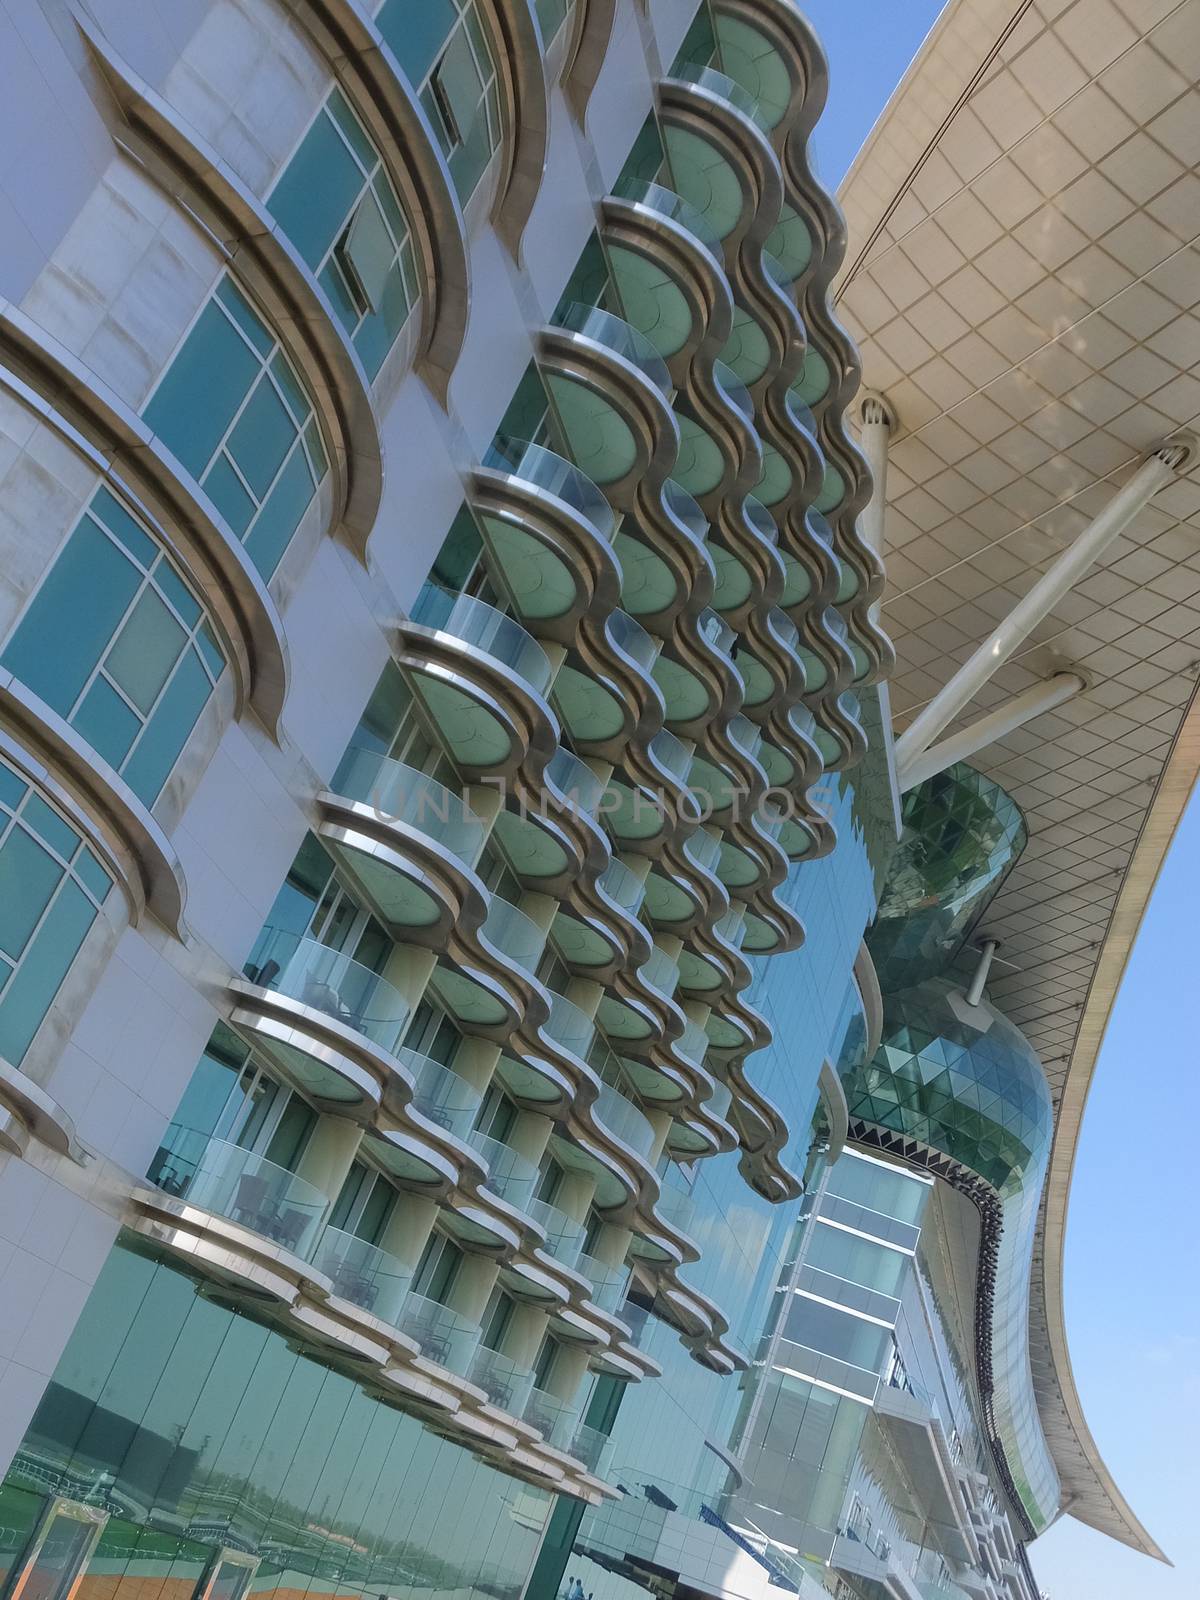 Meydan Hotel in Dubai, UAE. The Meydan is the worlds first 5-star trackside hotel with 285 rooms, 2 race tracks and the Grandstand.